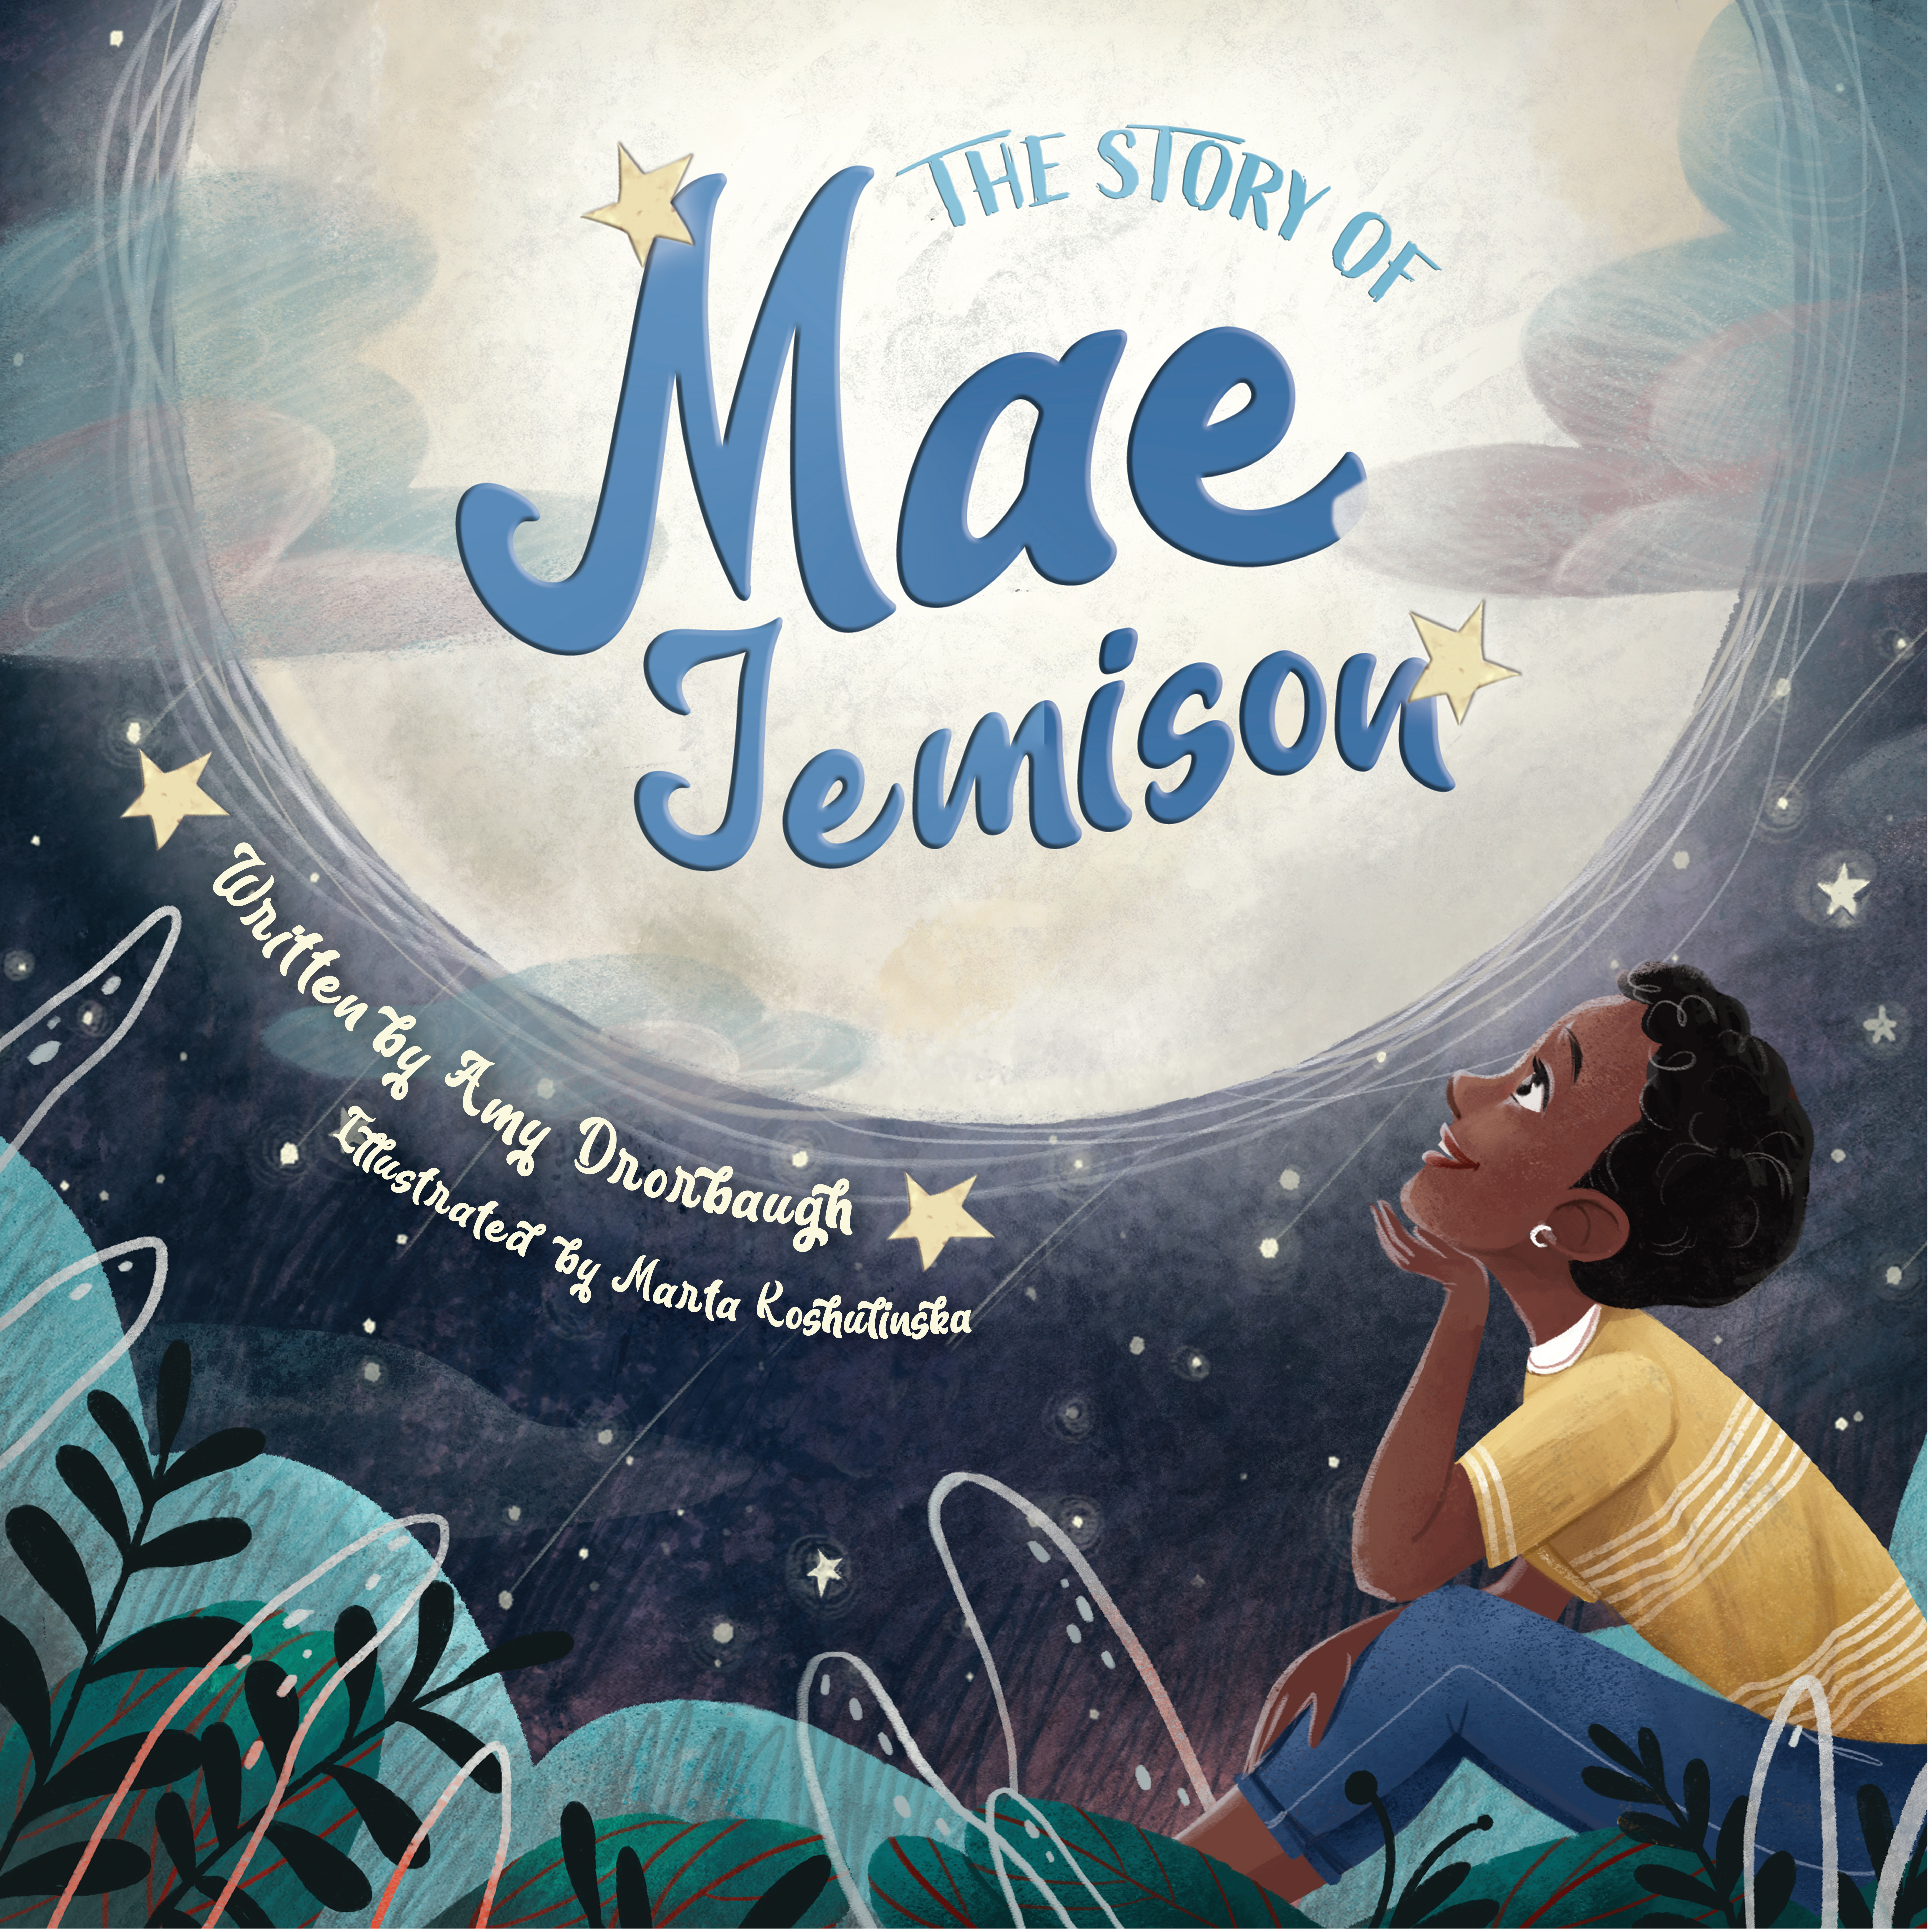 The Story of Mae Jemison by Amy Drorbaugh